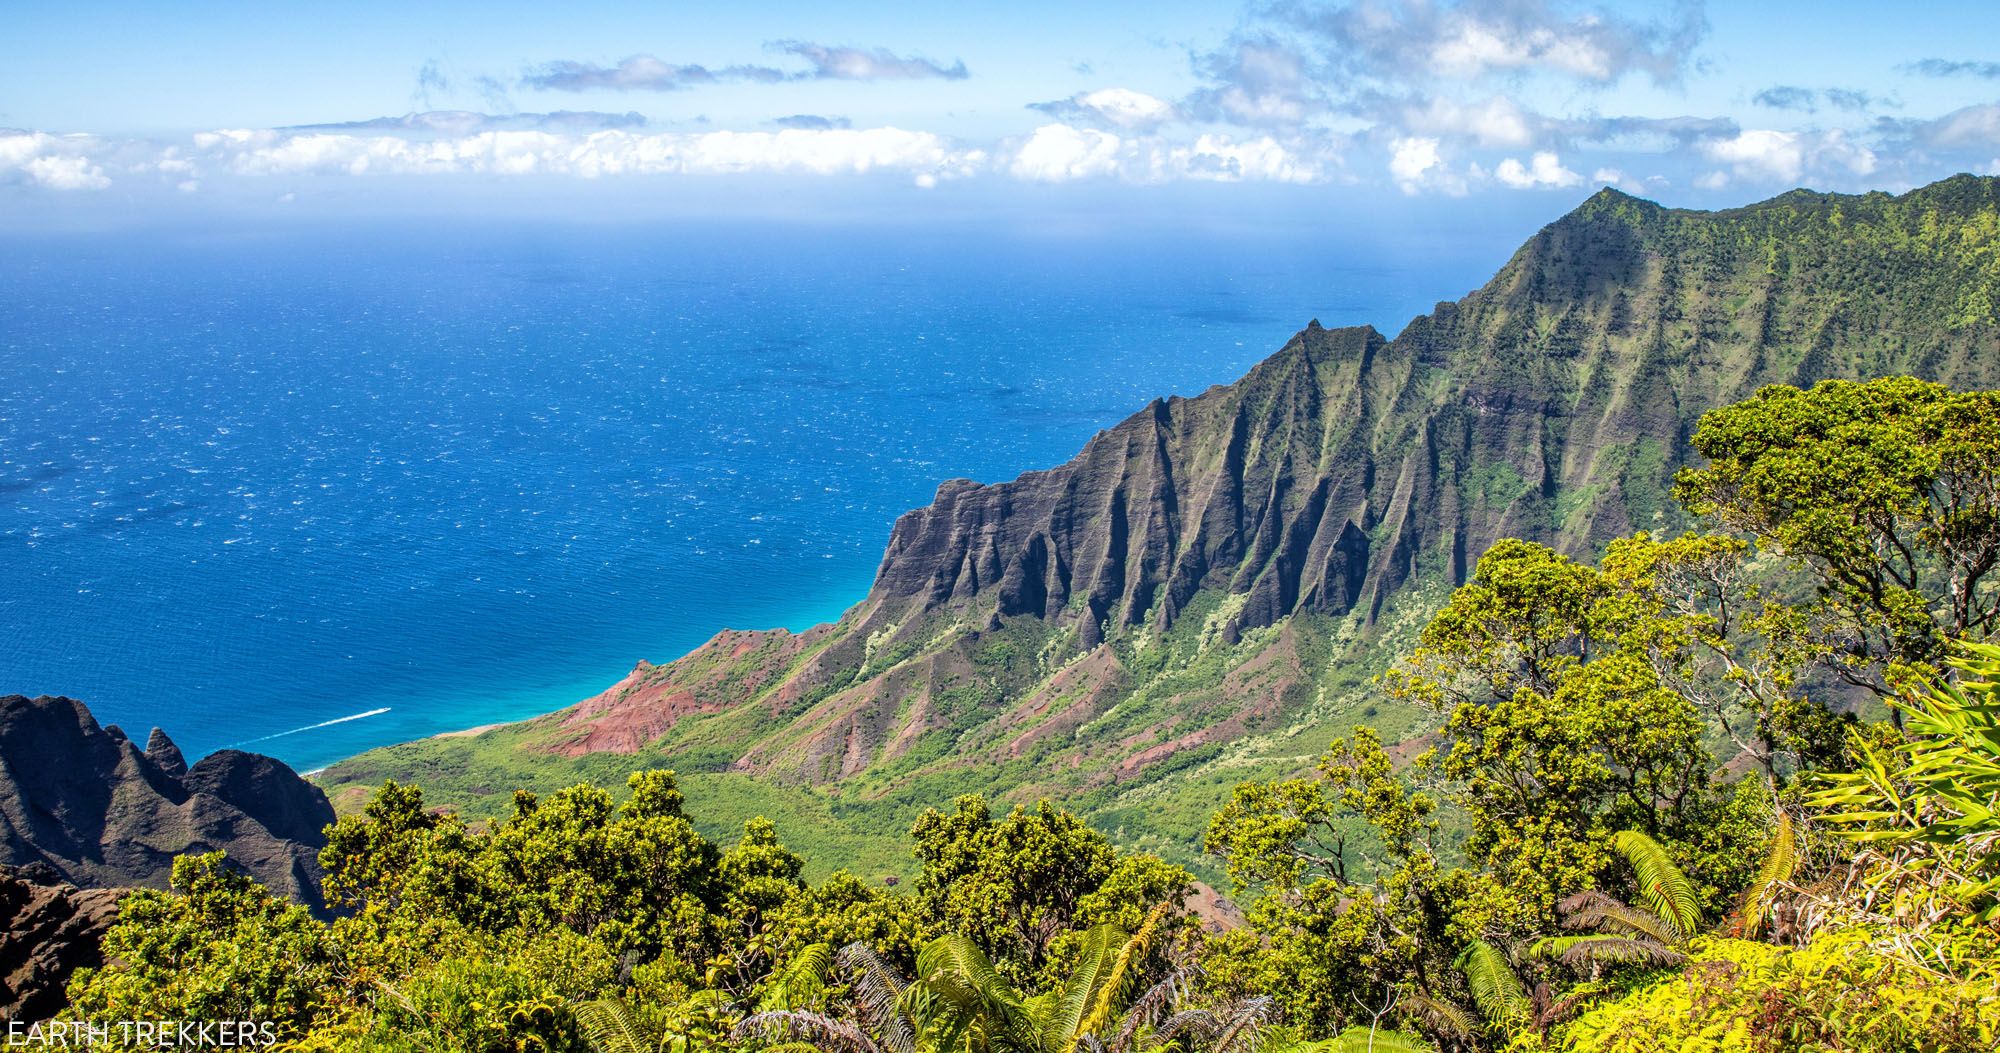 Featured image for “20 Best Things to Do in Kauai, Hawaii”